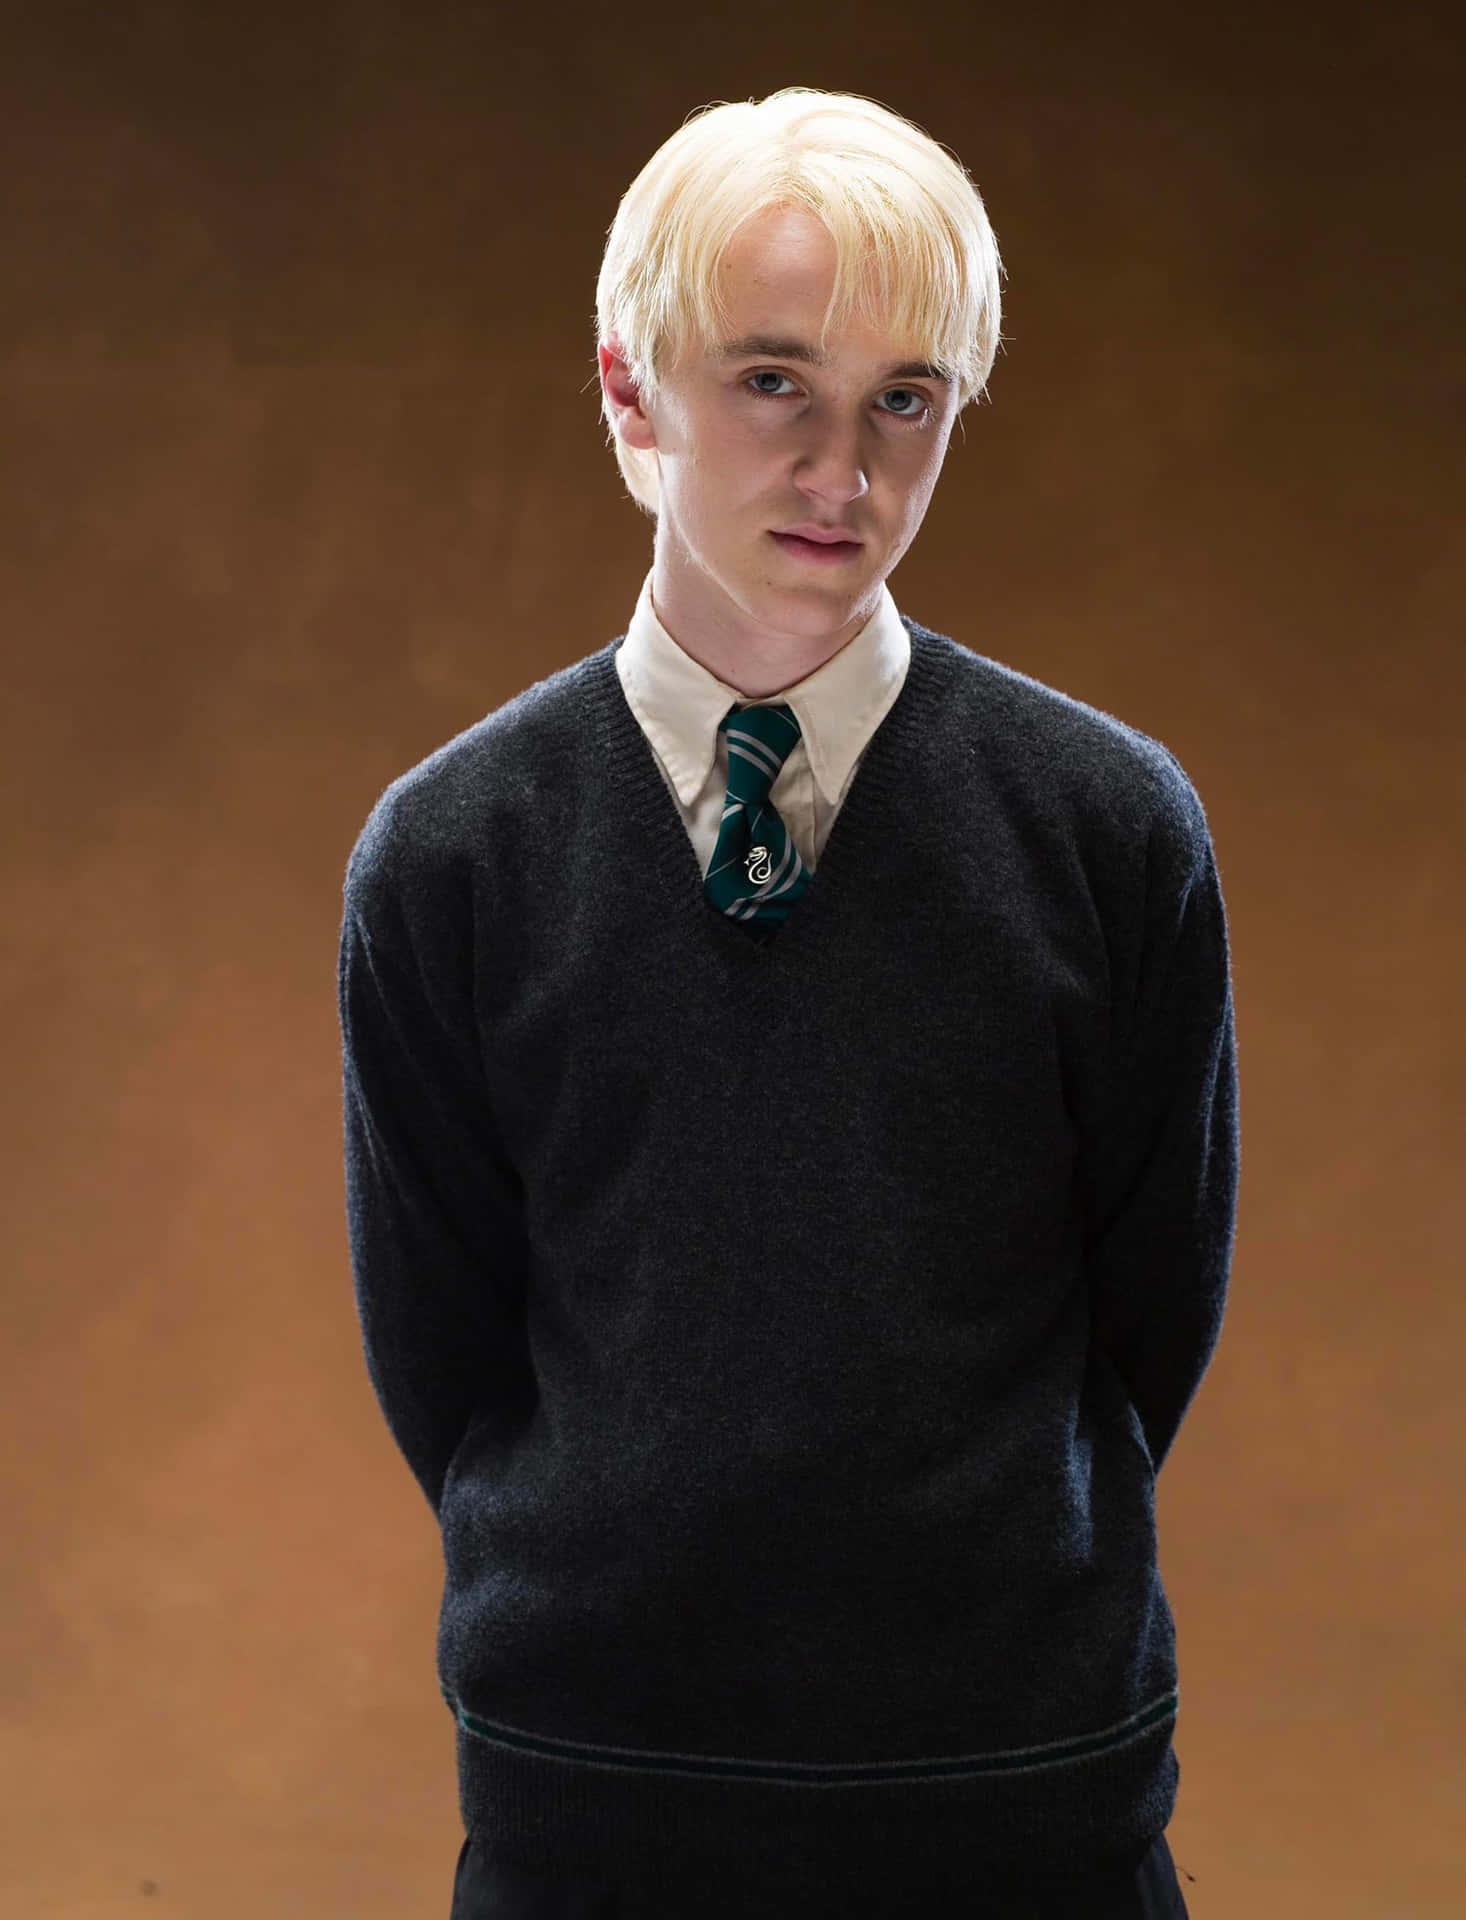 Draco Malfoy showing off his signature smirk